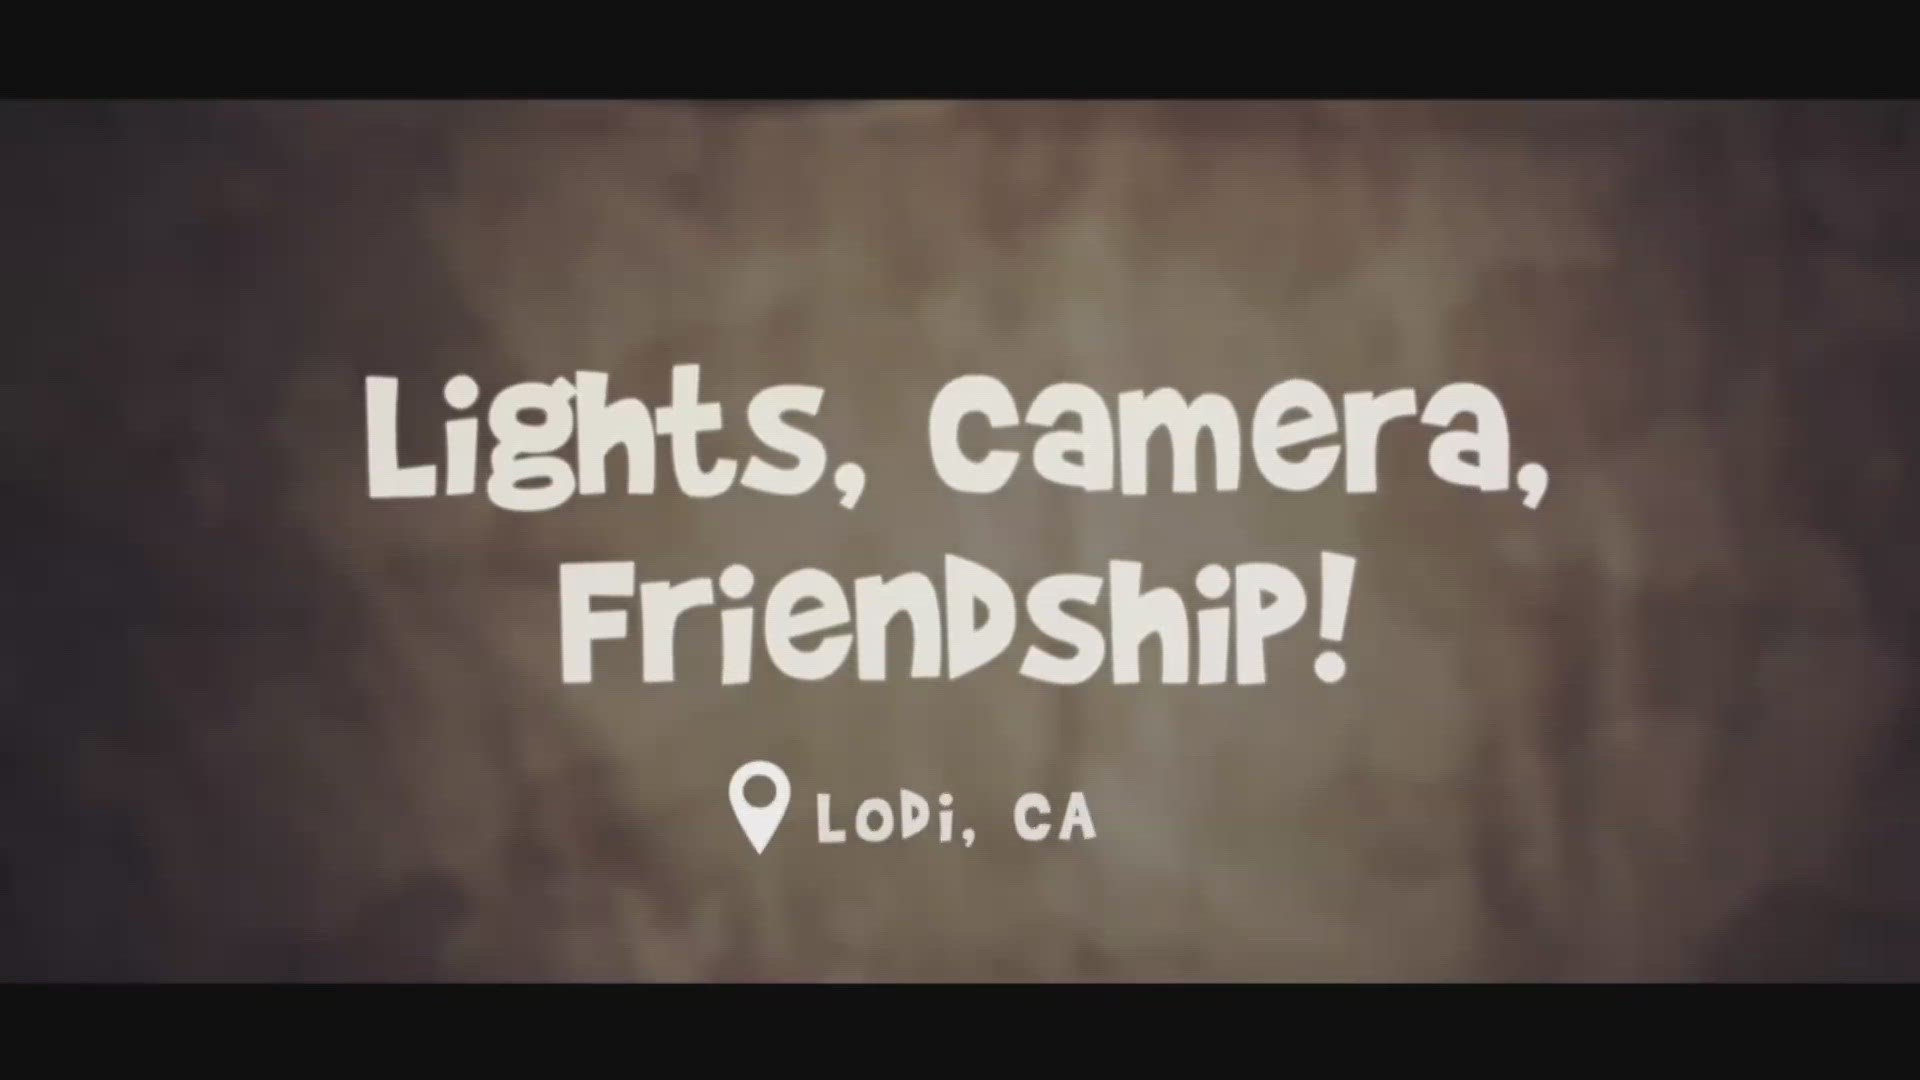 "Lights, Camera, Friendship" is a documentary series featuring a group of people from the neuro-diverse community who come together to develop life skills.